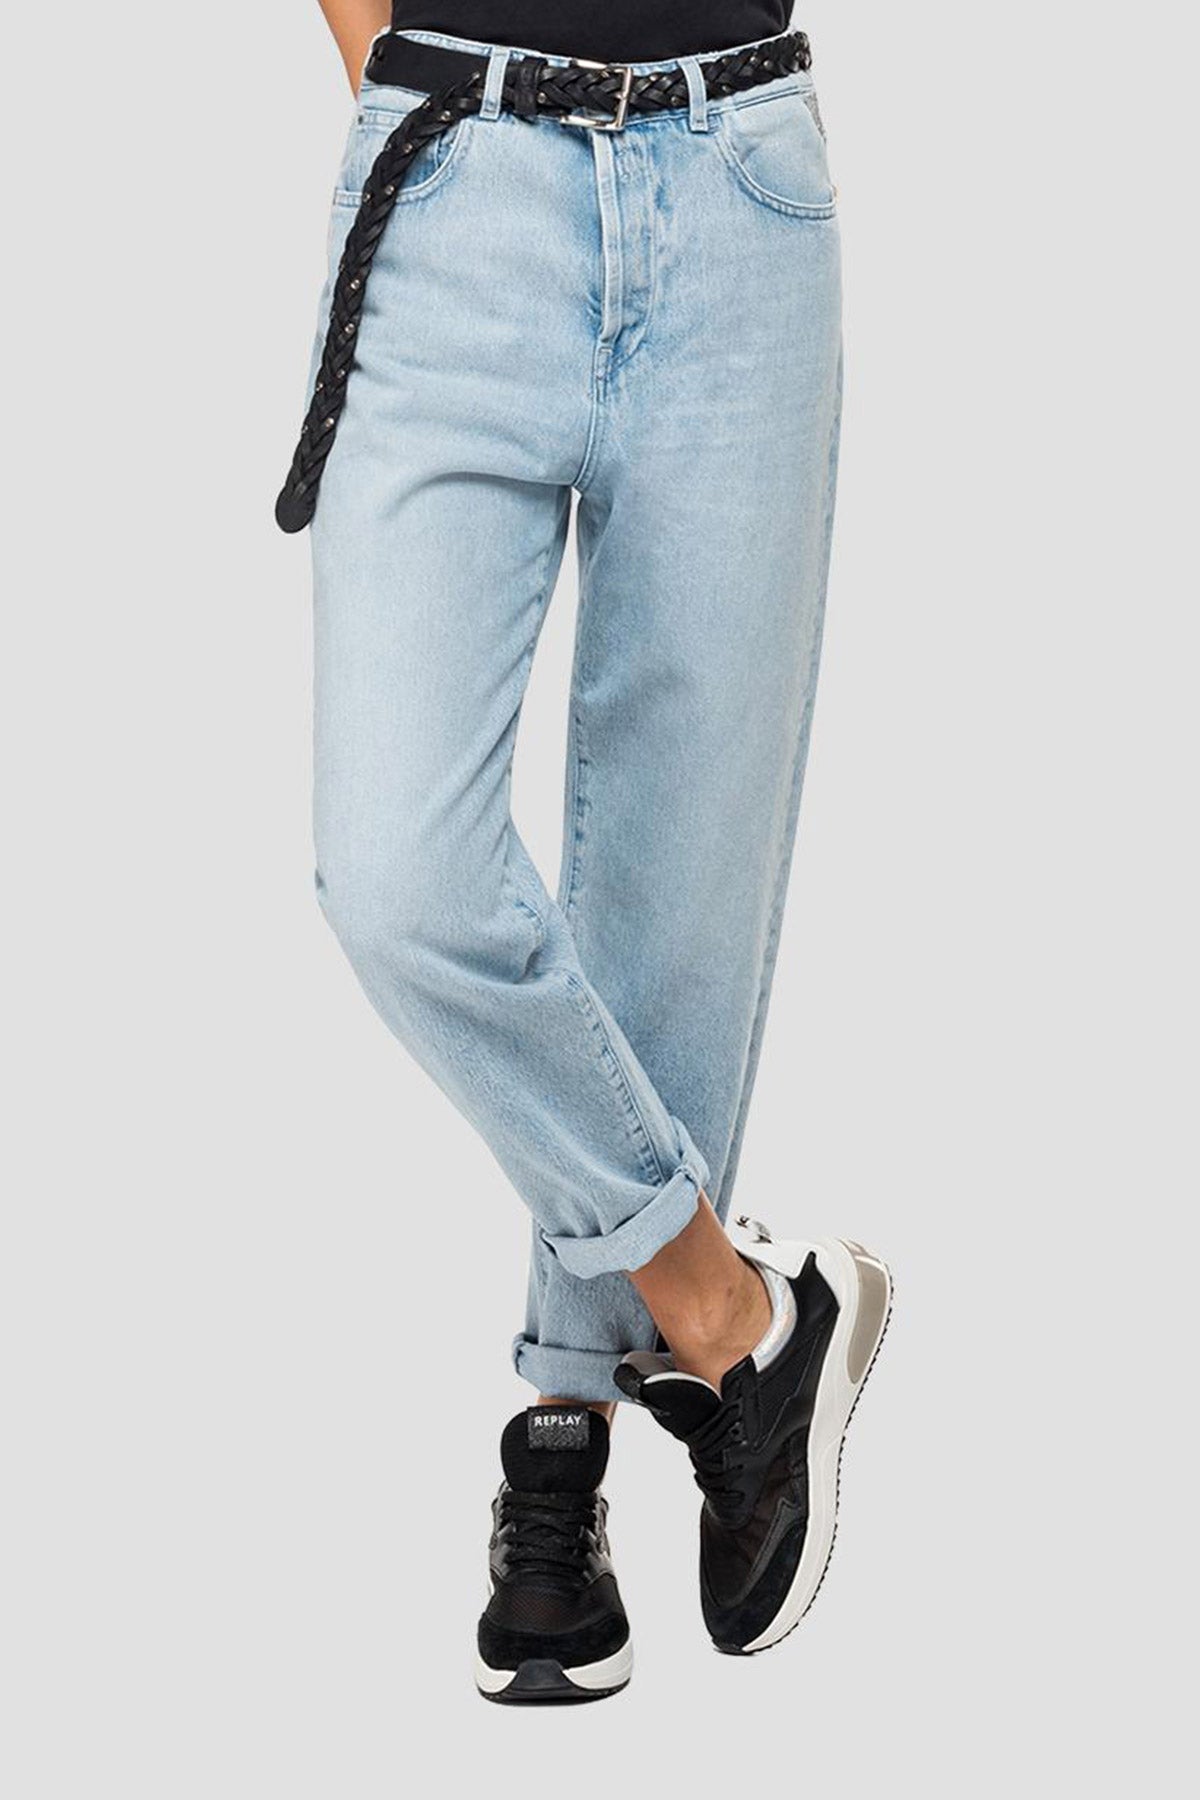 Replay Mom Fit Tyna Jeans-Libas Trendy Fashion Store